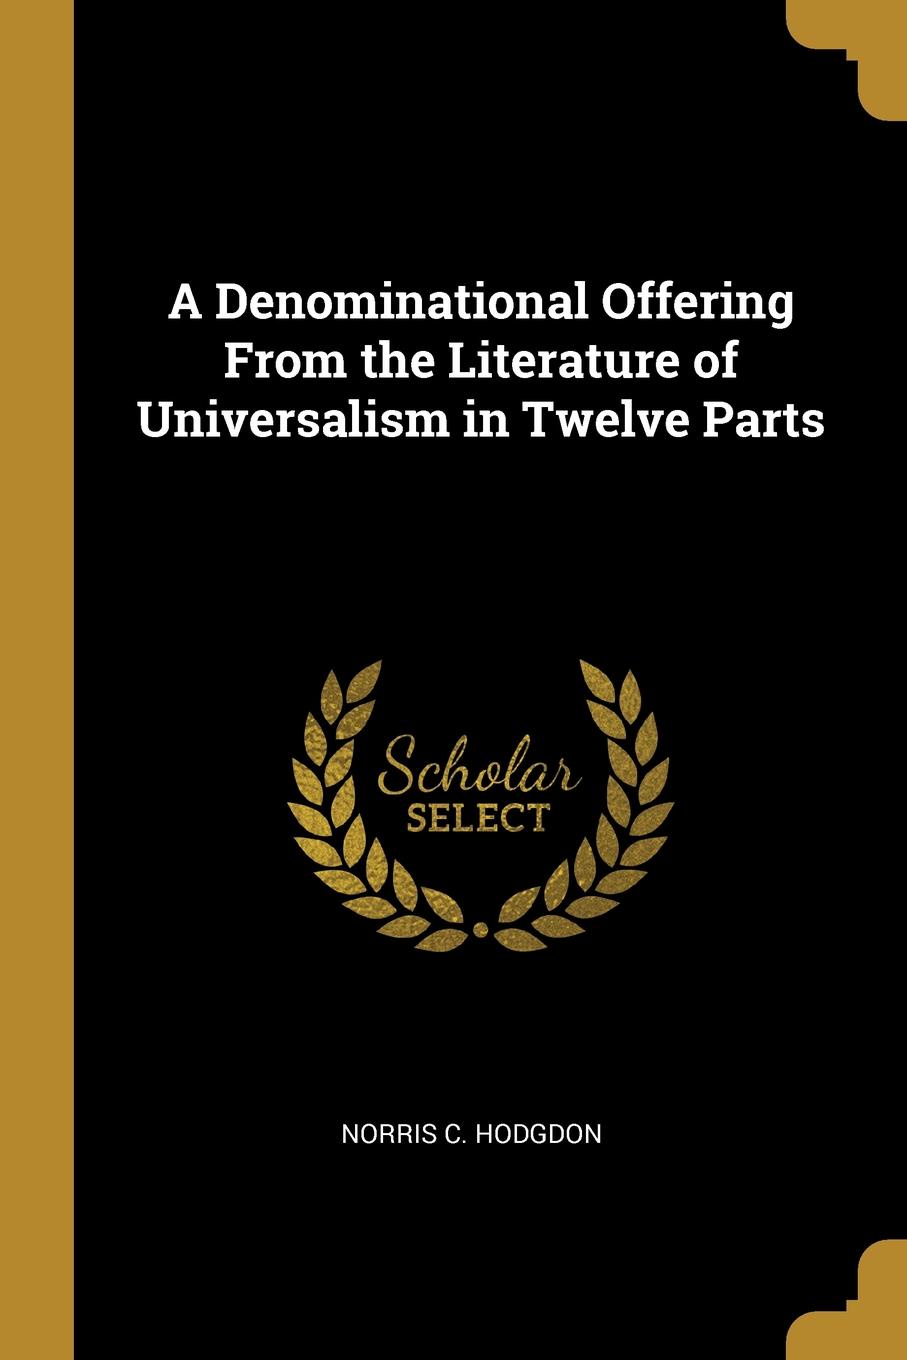 A Denominational Offering From the Literature of Universalism in Twelve Parts